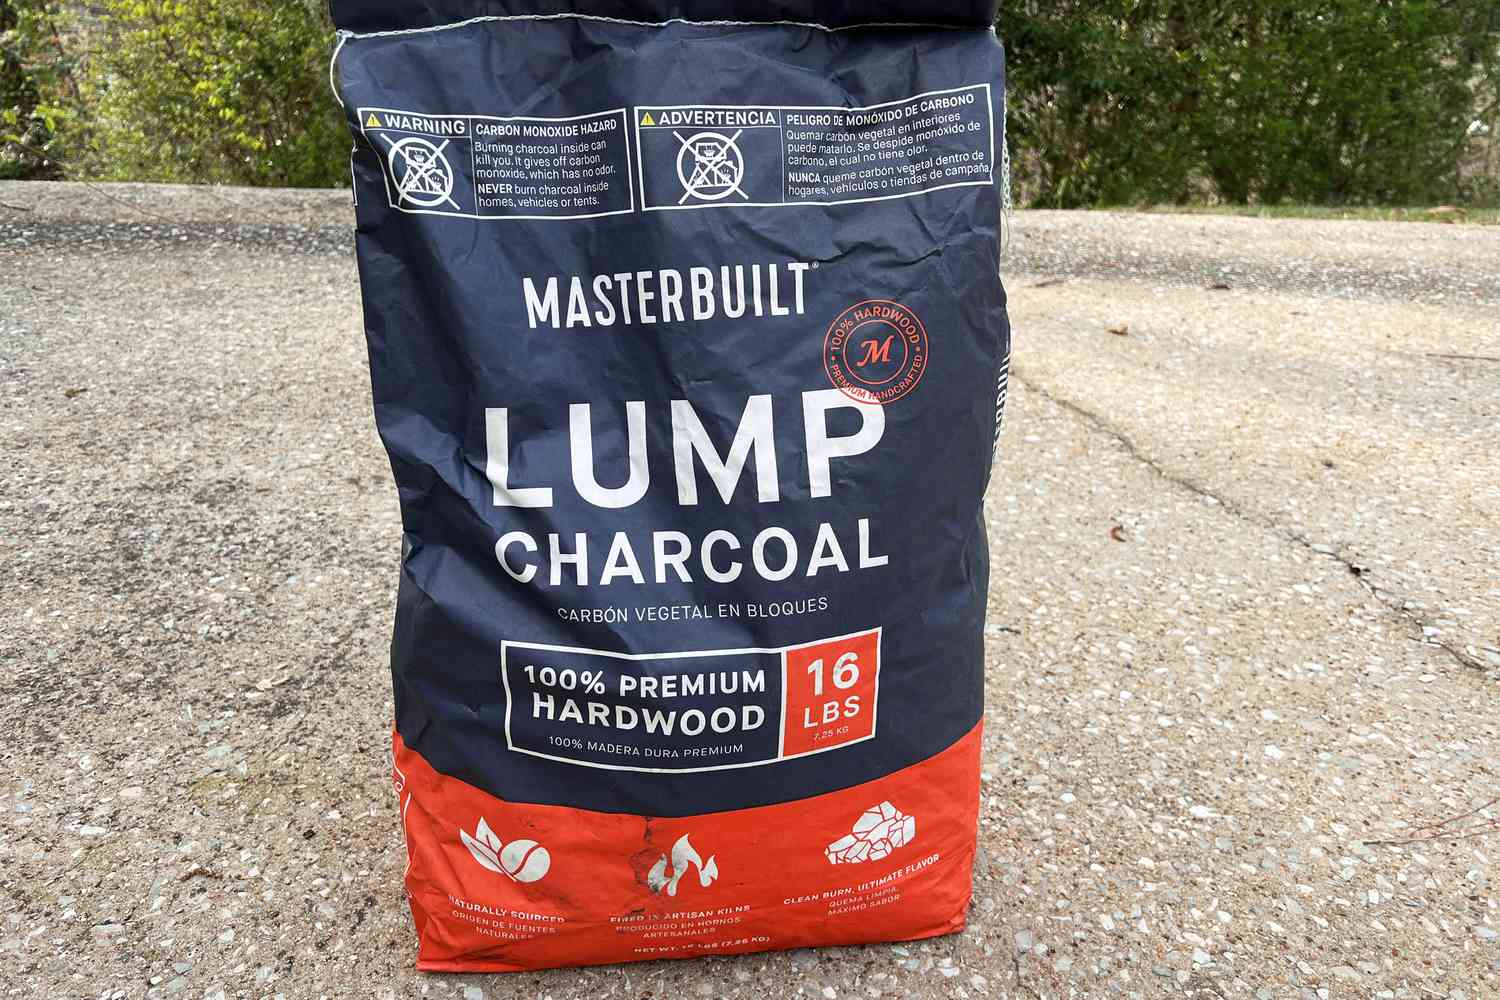 a bag of lump charcoal on a concrete surface